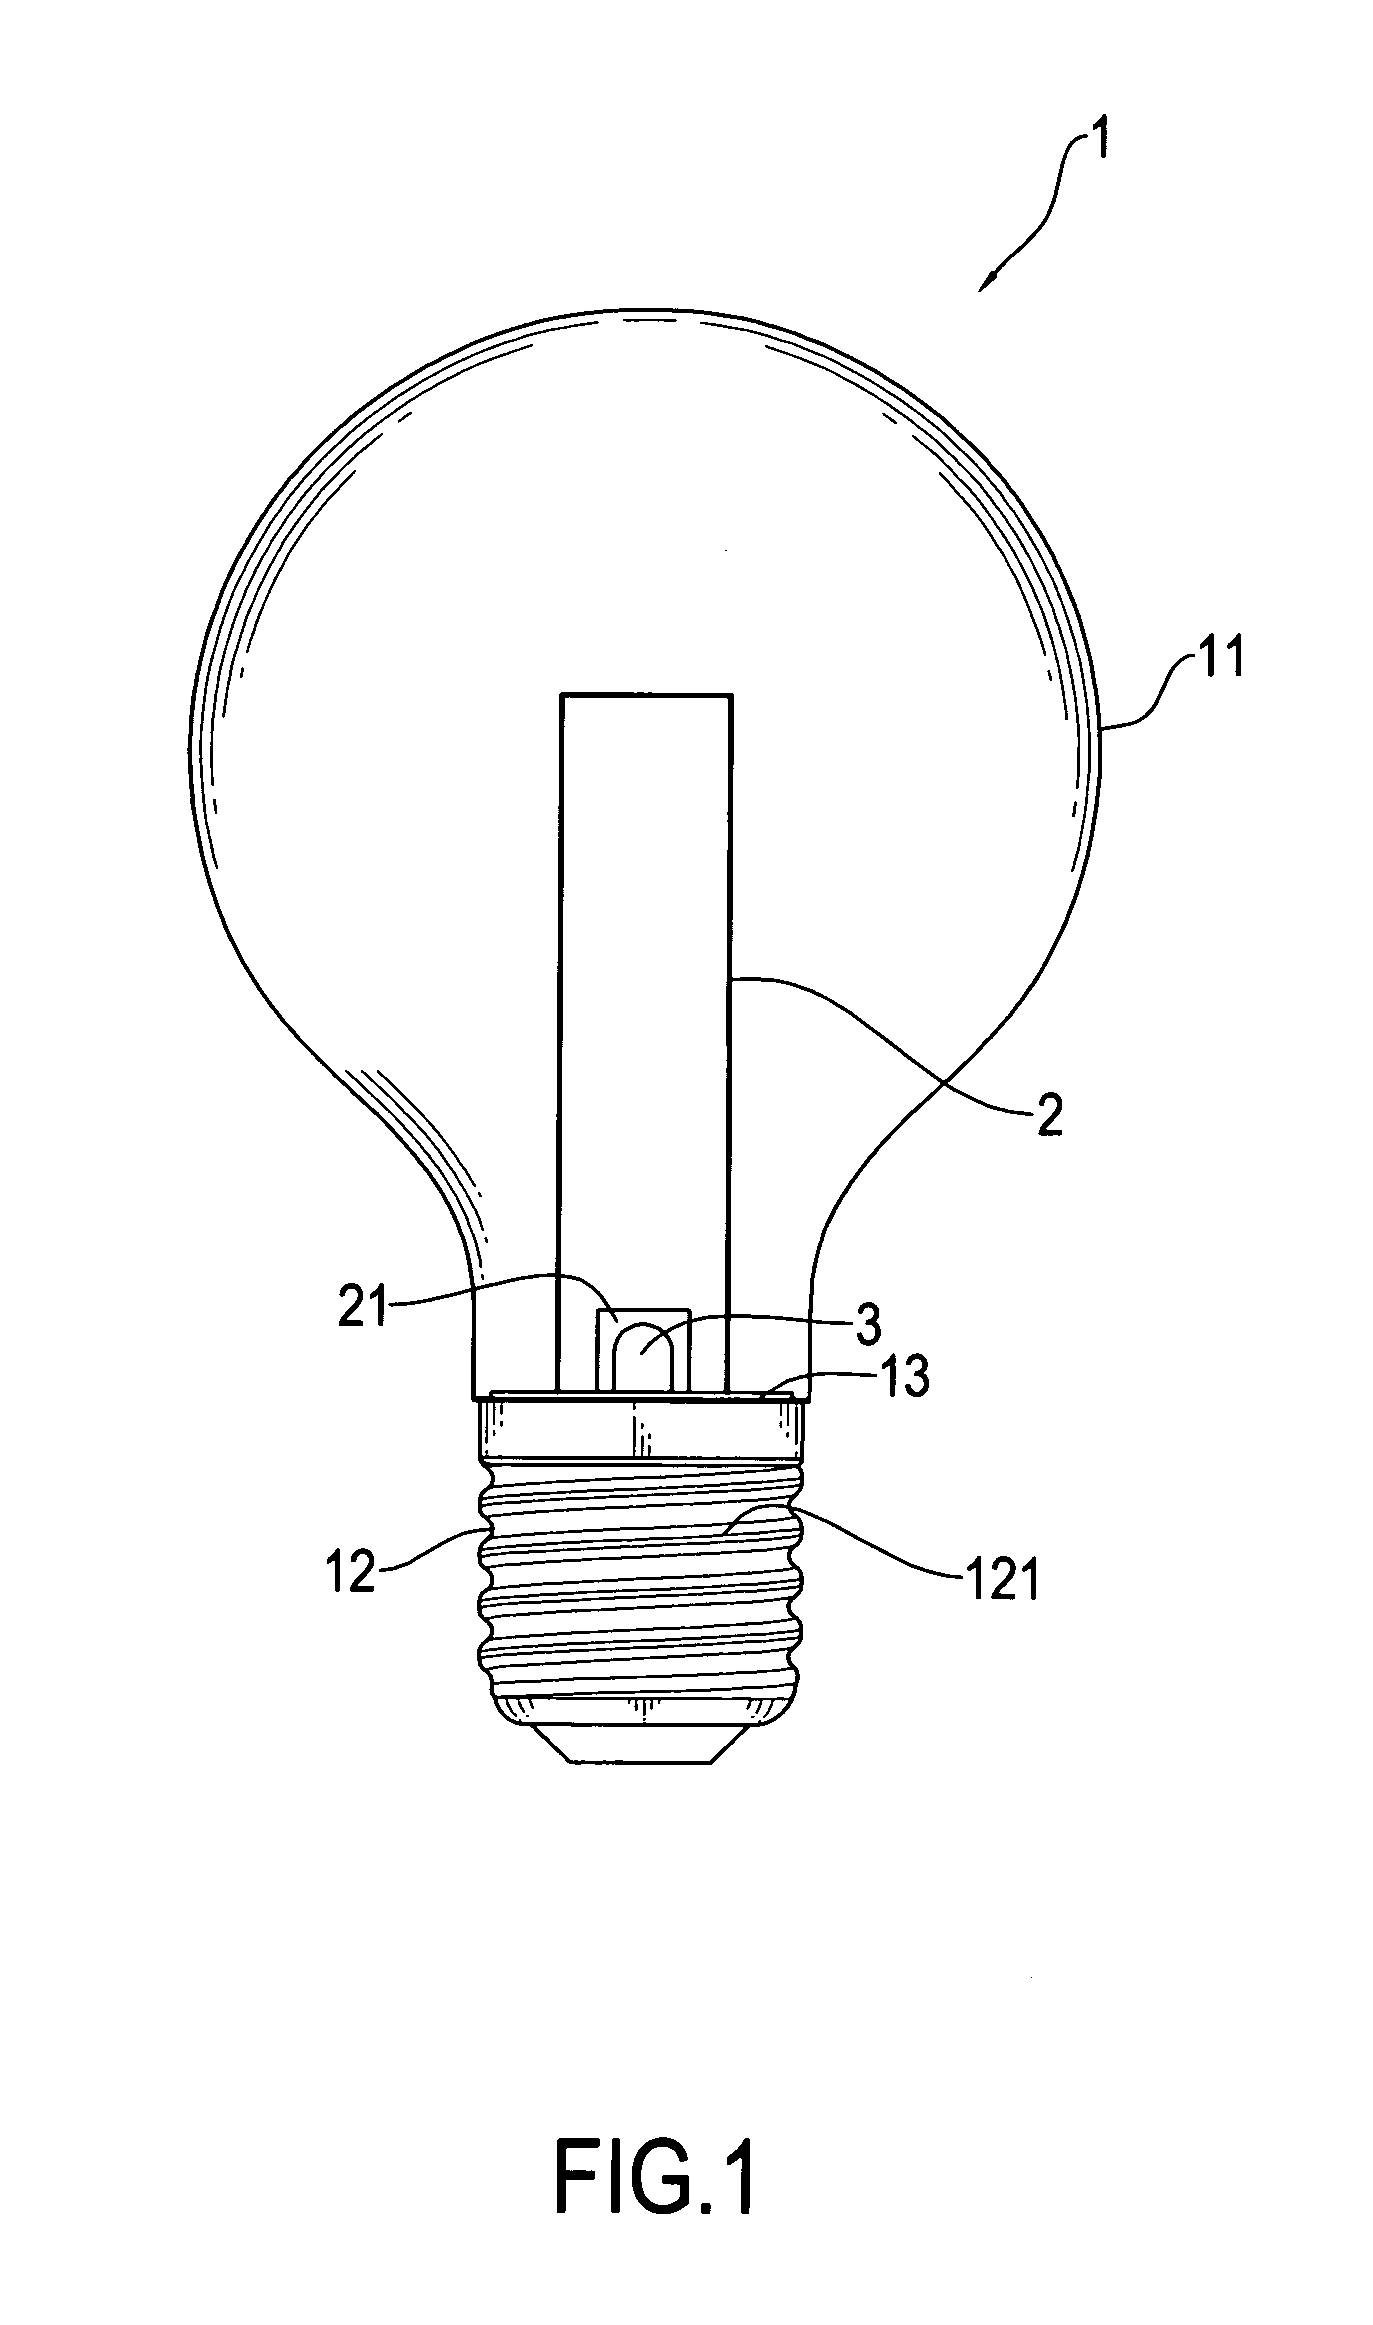 Structure of light bulb